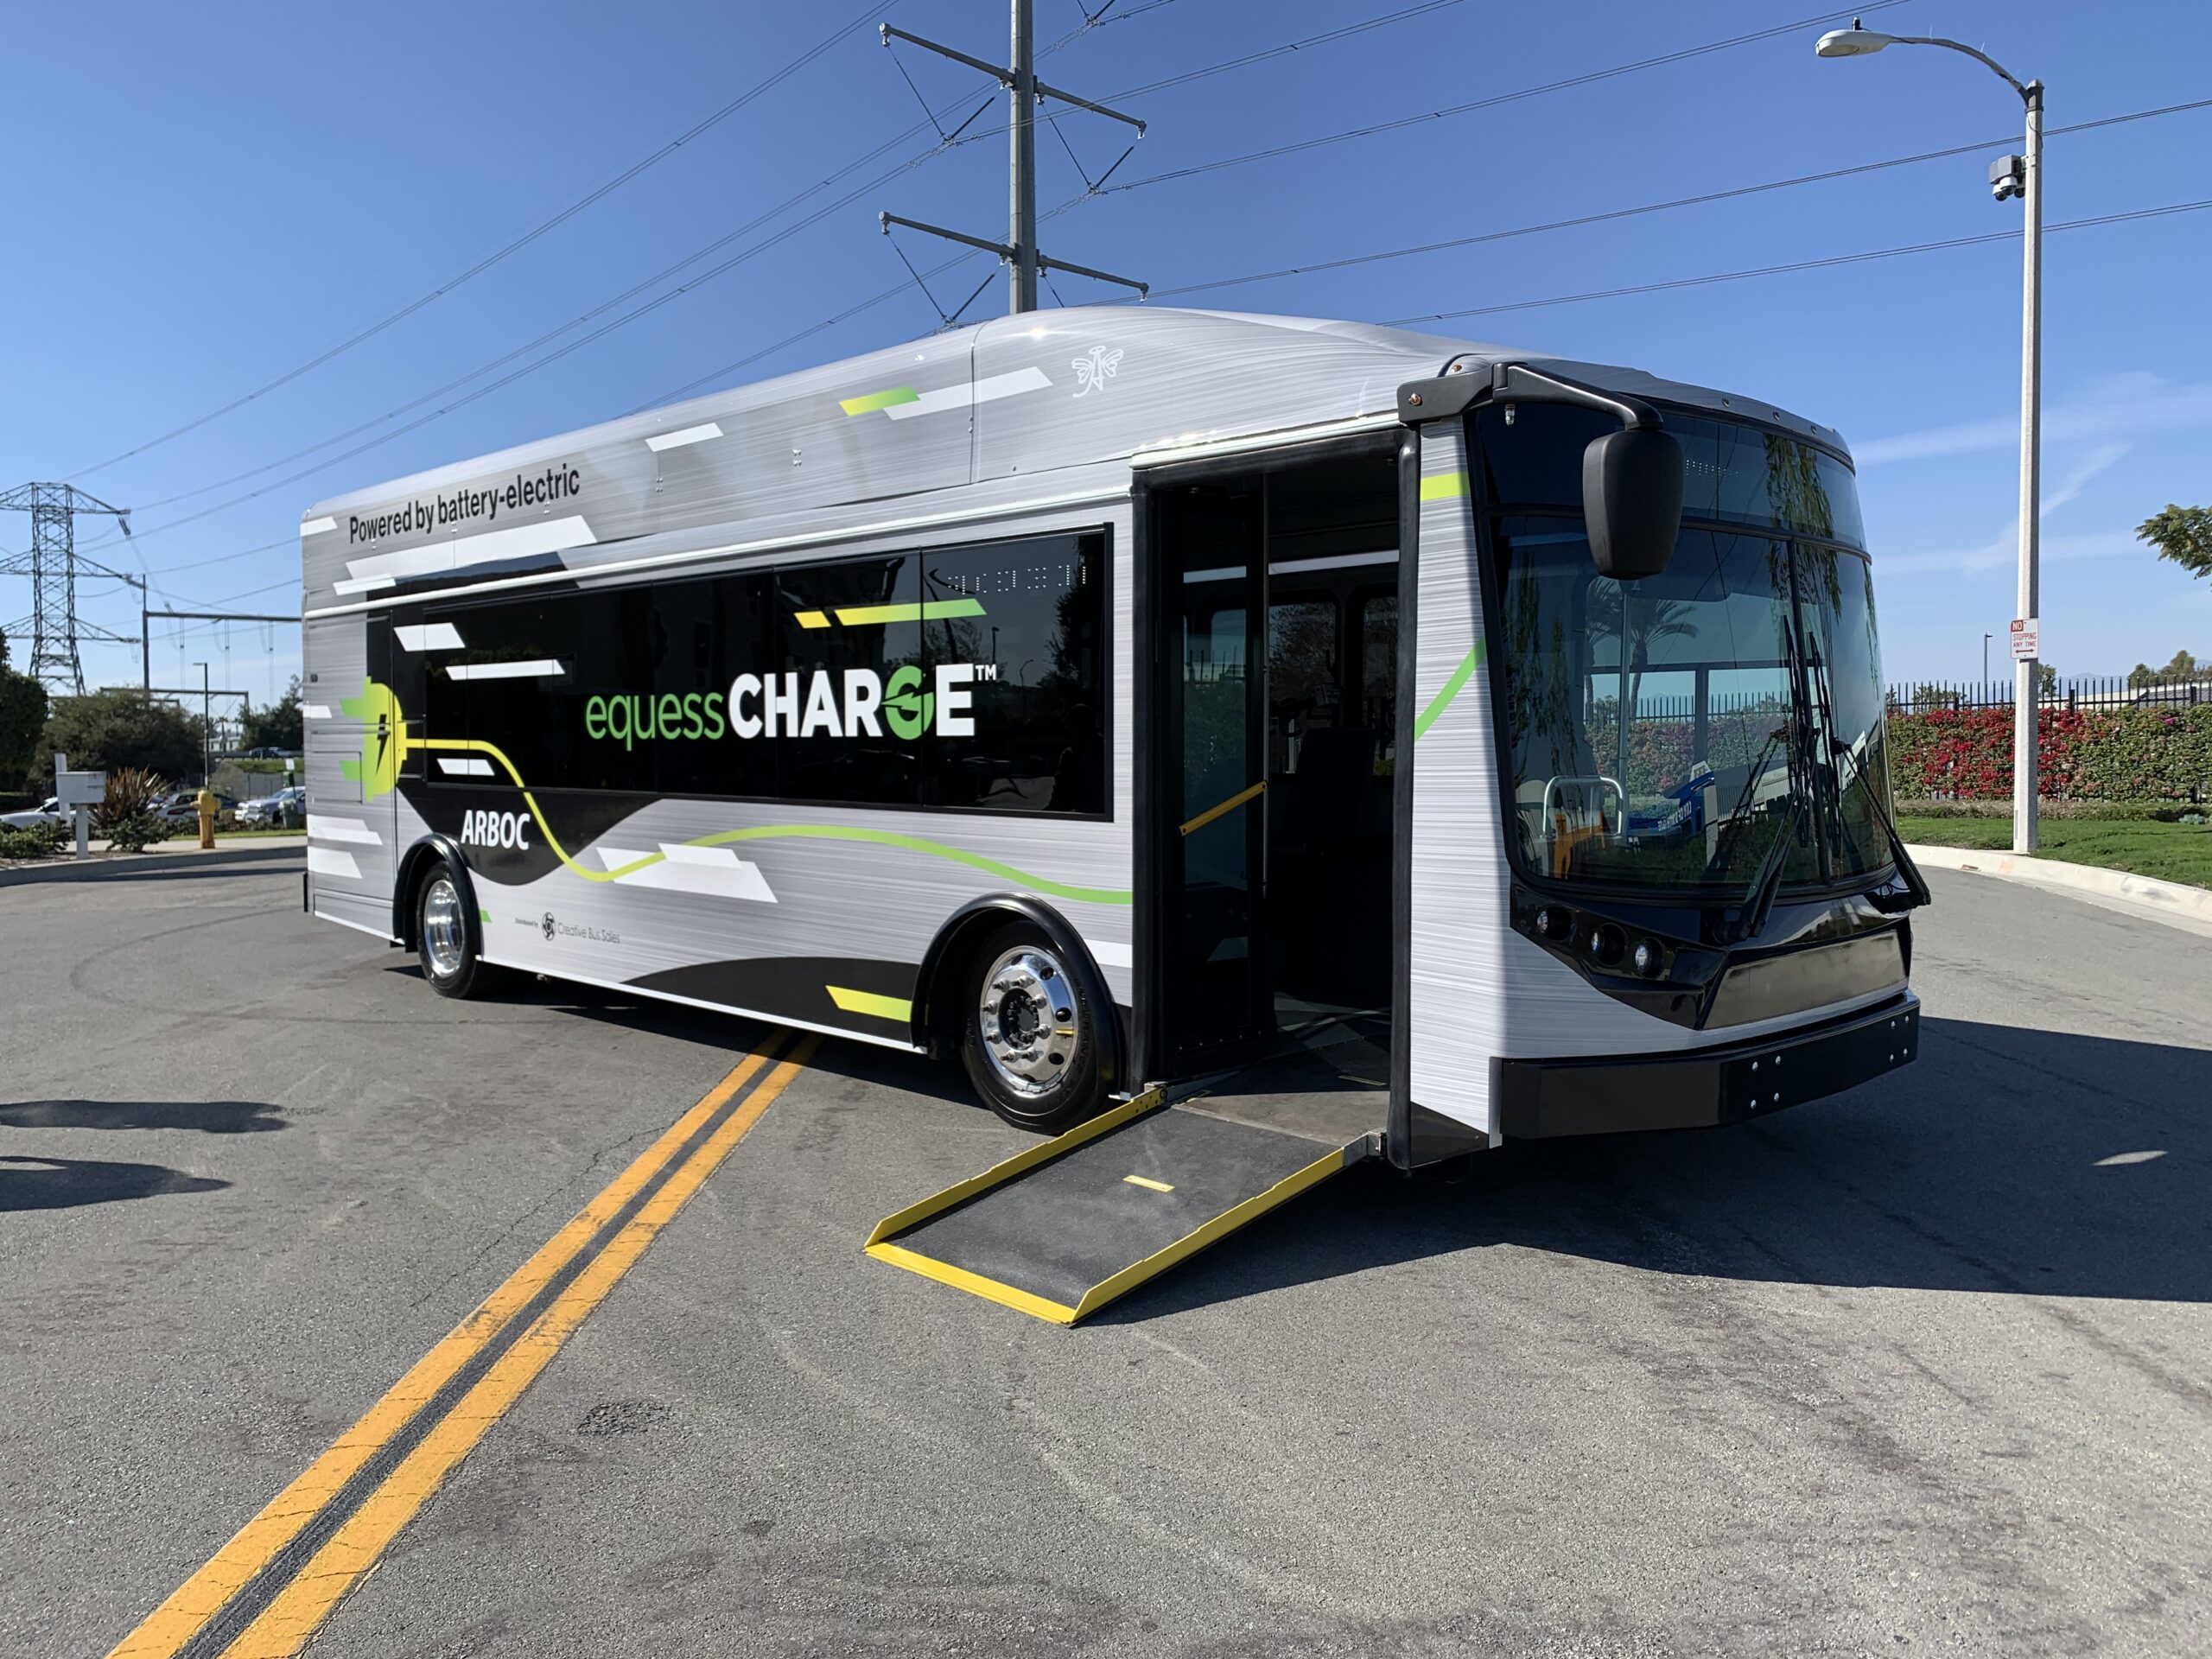 A 2021 electric bus is parked on the side of the road.